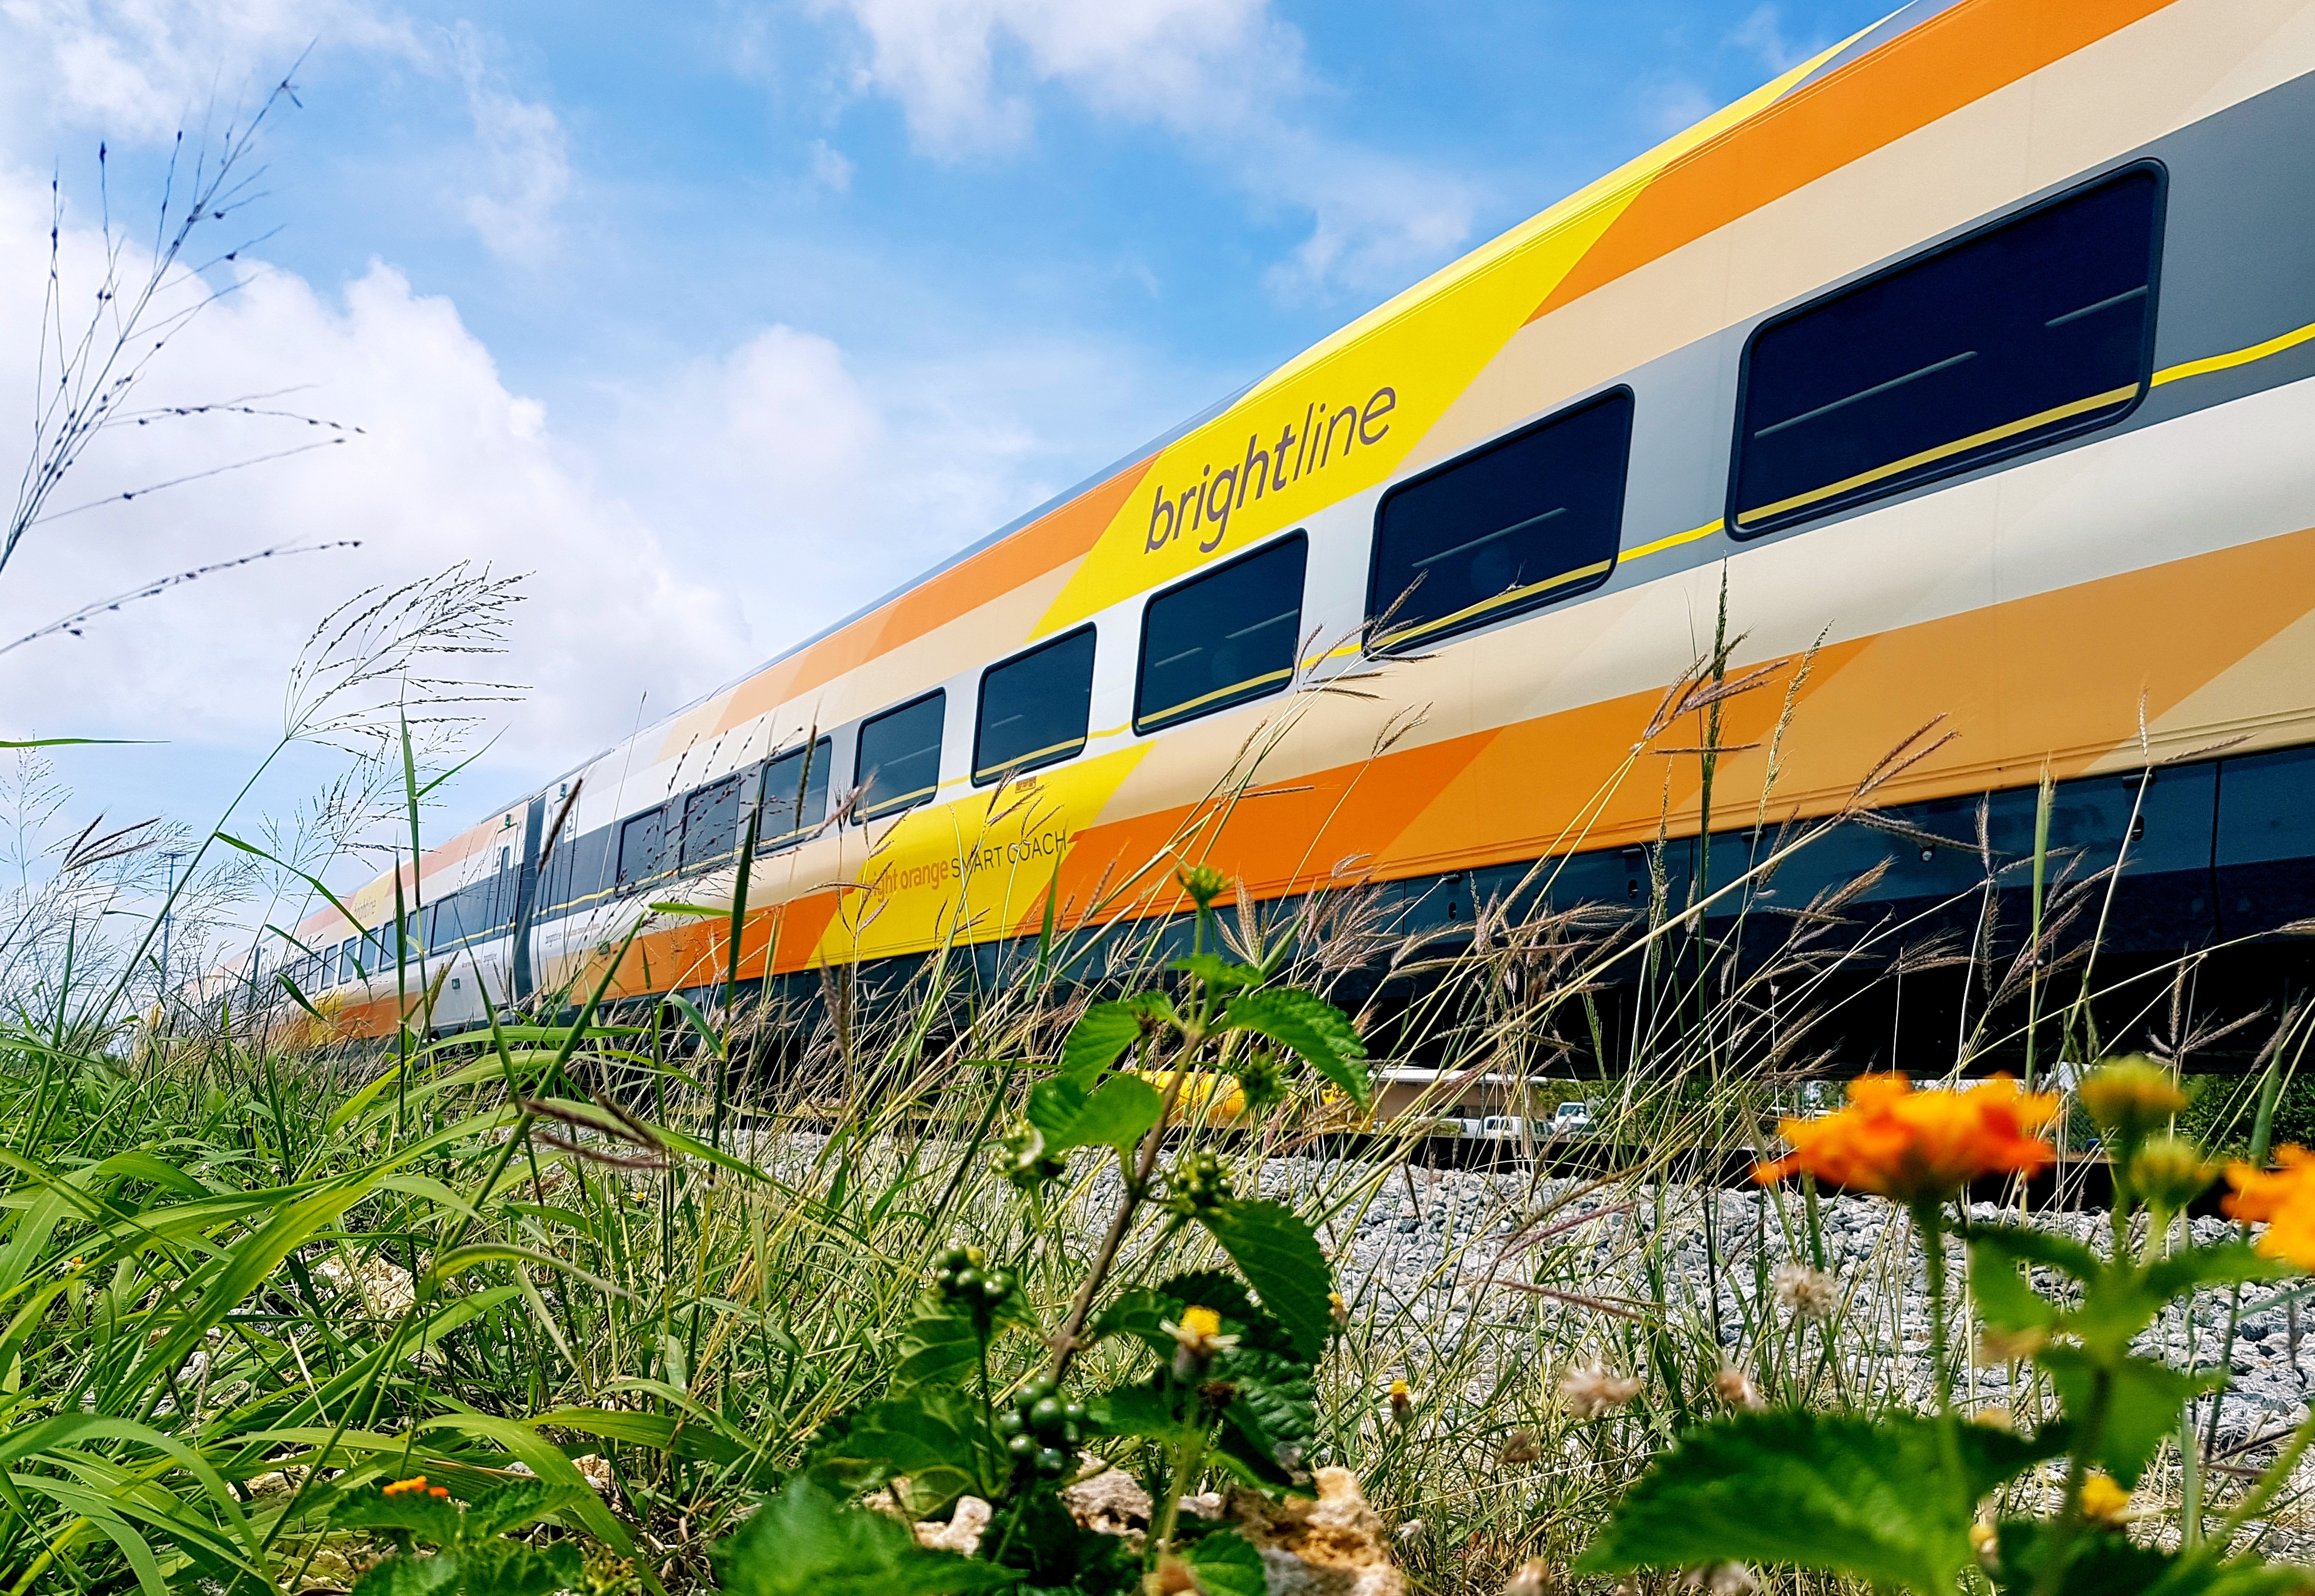 
            Brightline Aims High After Years of Hopes